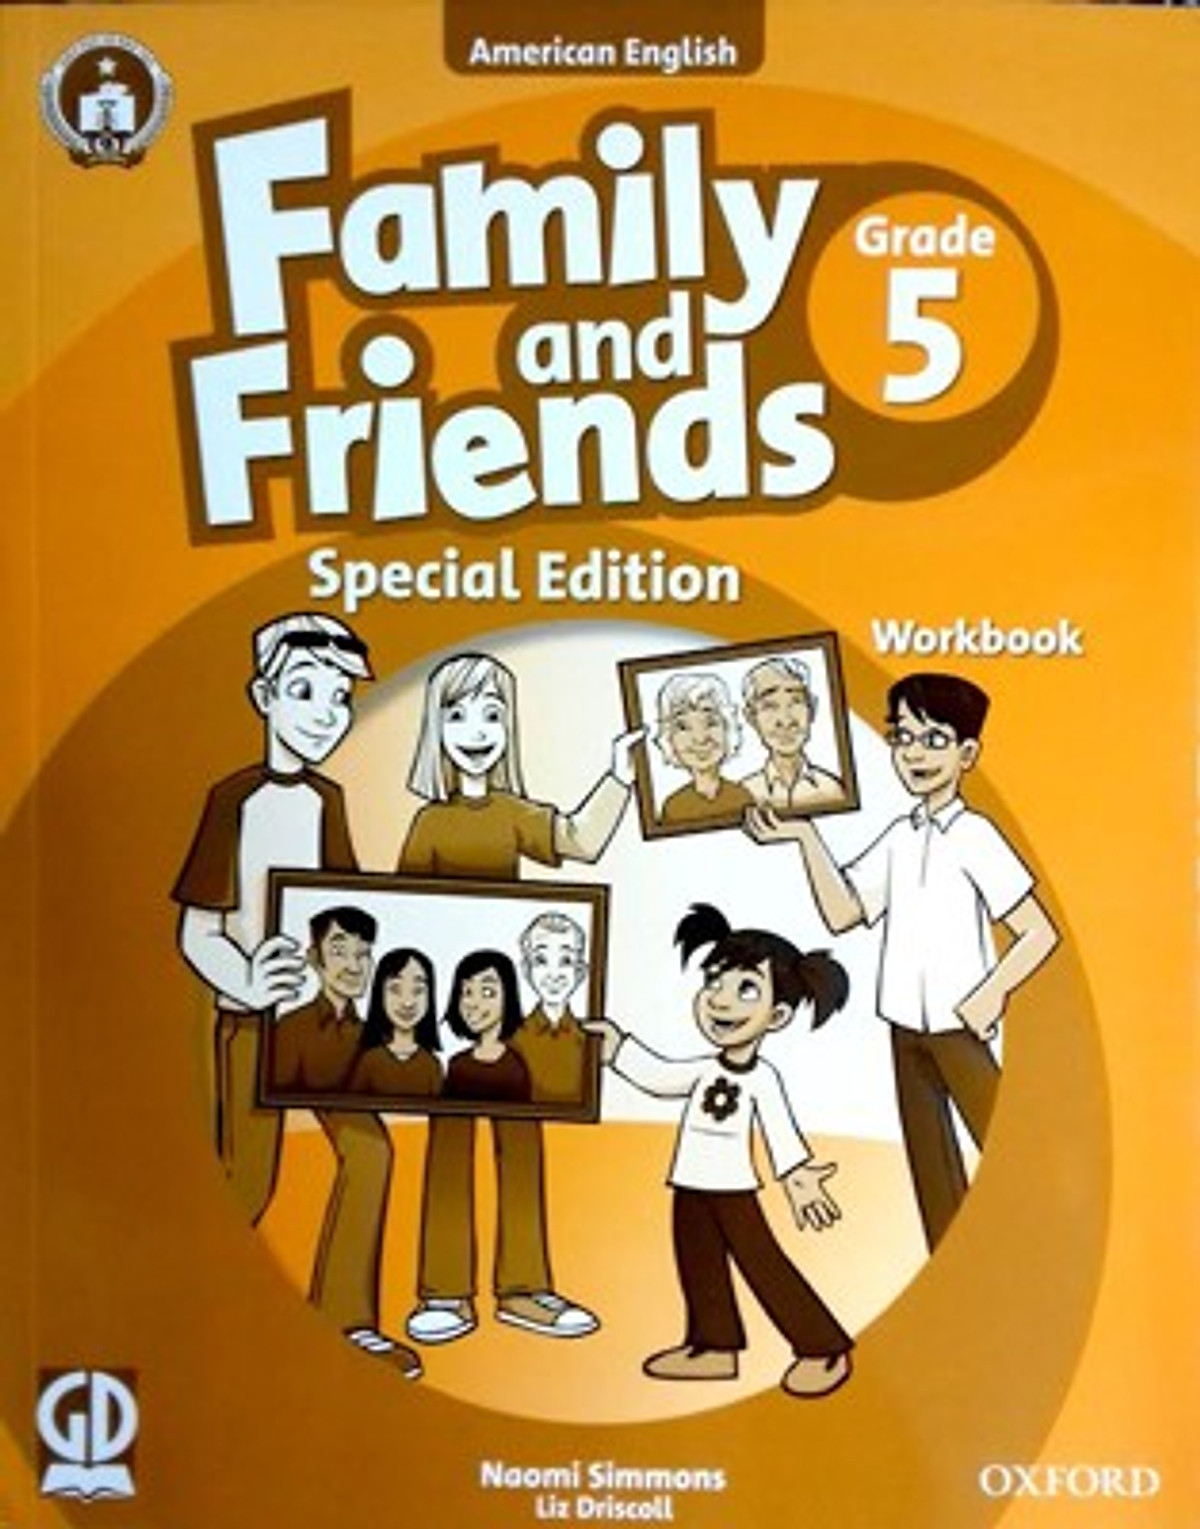 Family And Friends (Ame. Engligh) (Special Ed.) Grade 5: Workbook